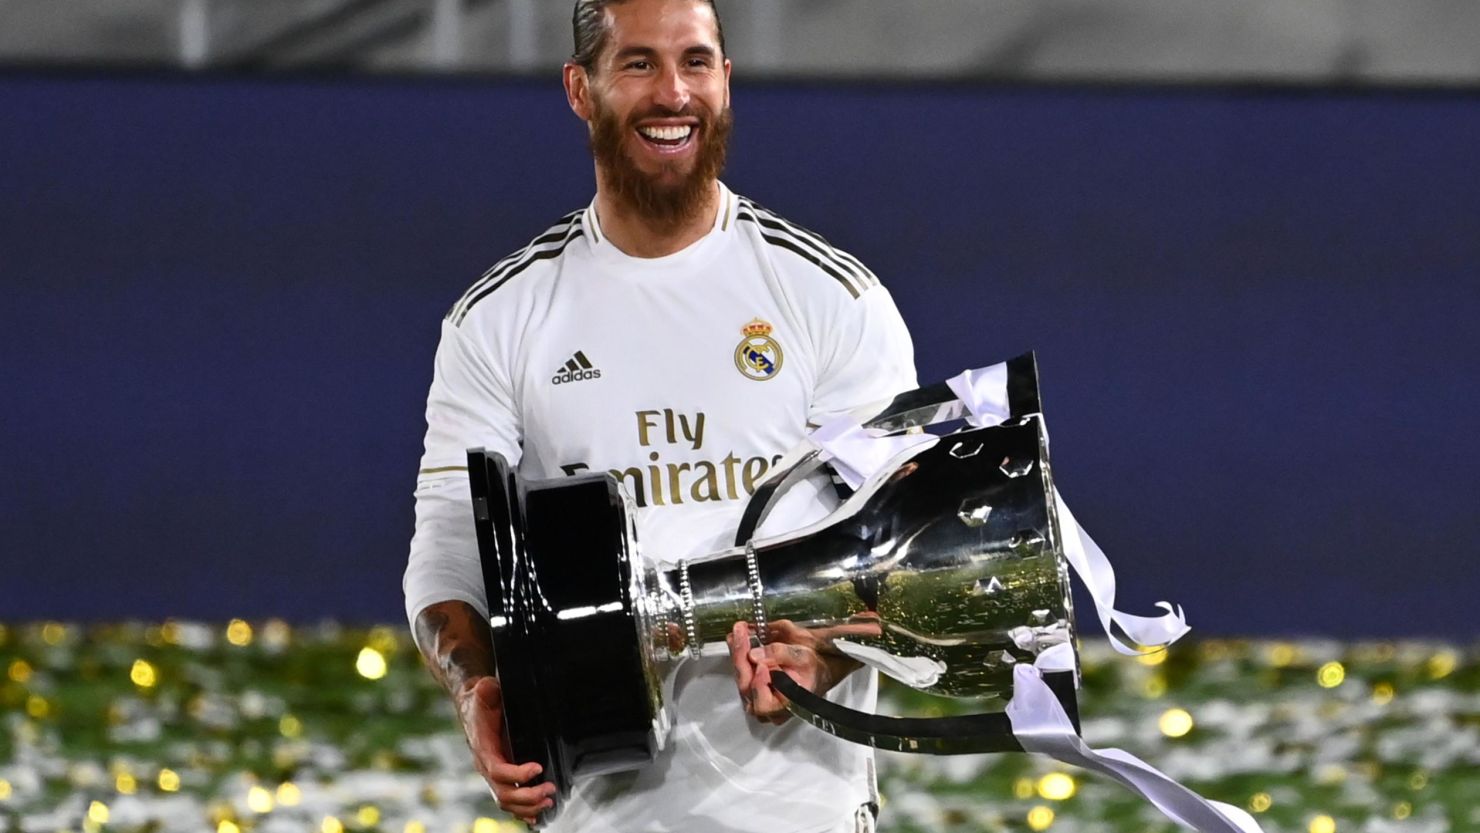 Sergio Ramos to leave Real Madrid after 16 years | CNN